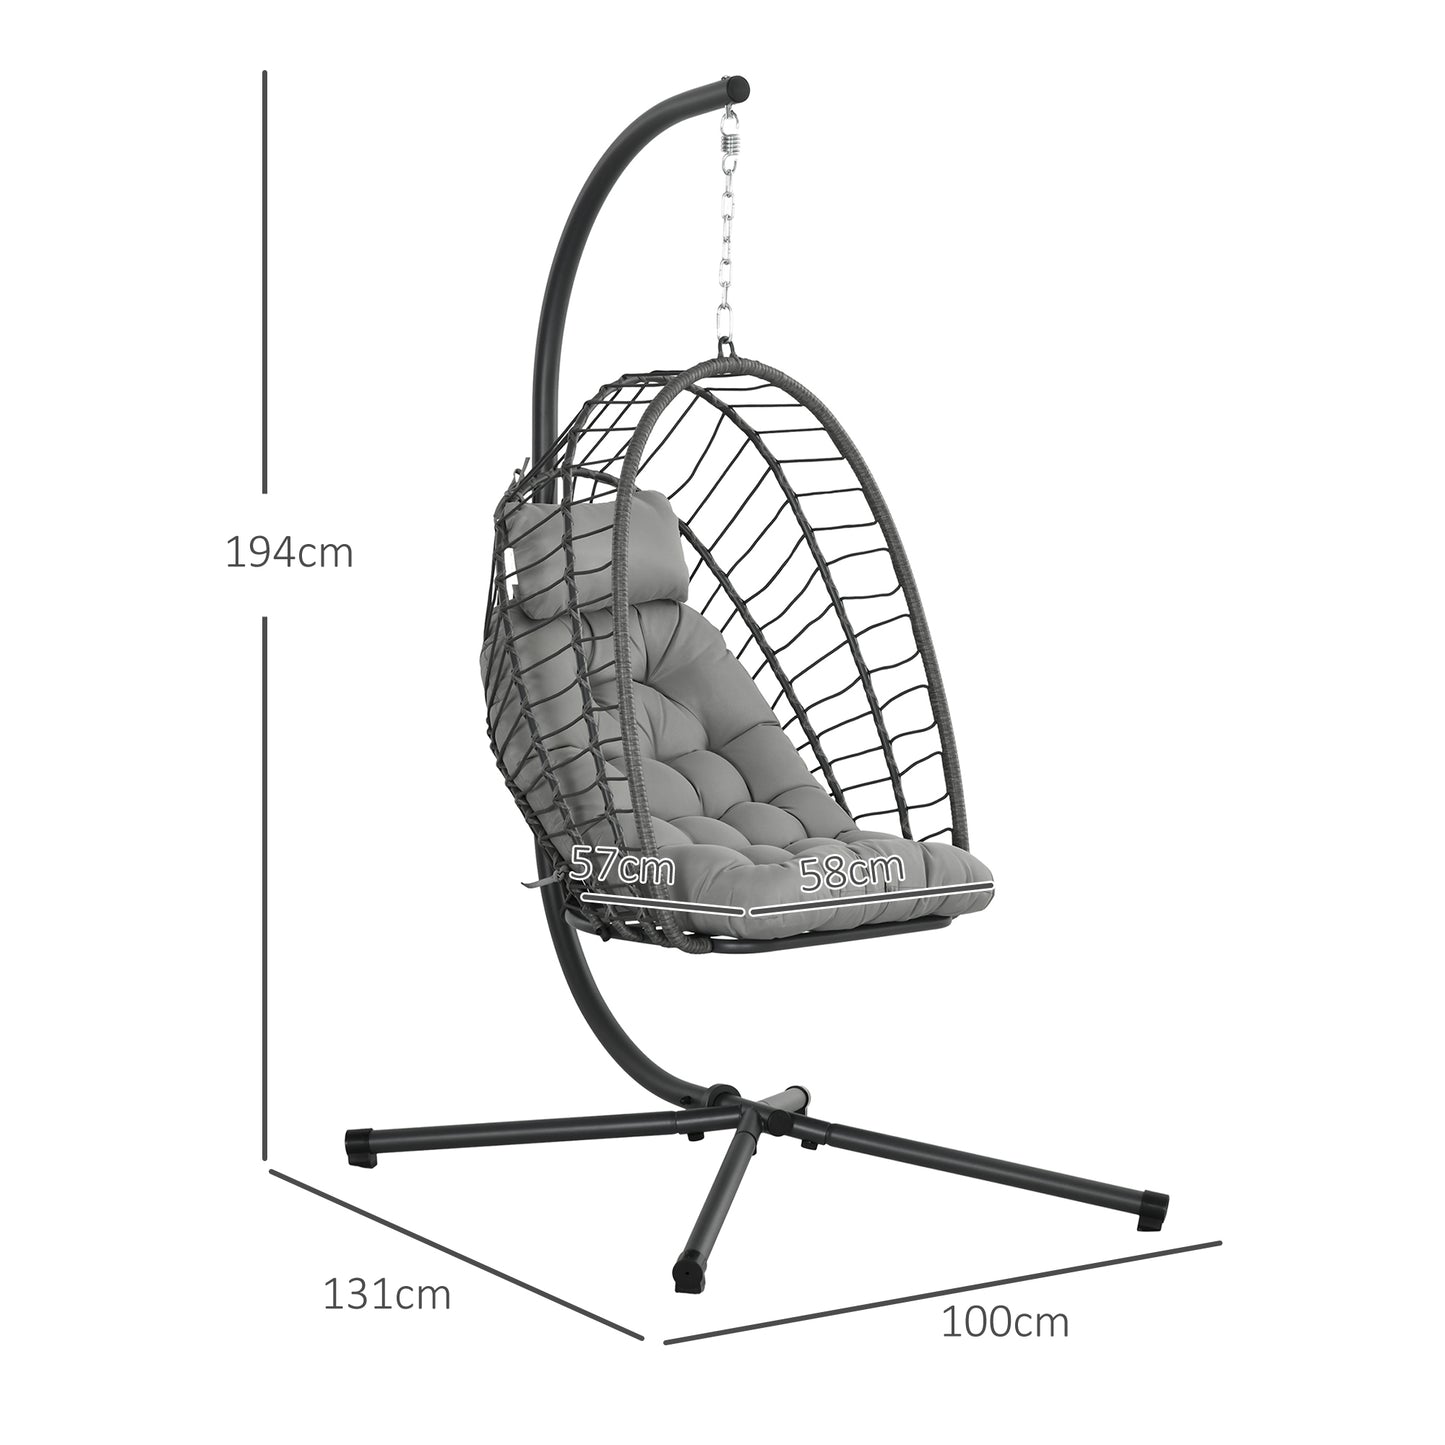 Outsunny Outdoor PE Rattan Swing Chair with Cushion, Garden Foldable Basket Patio Hanging Egg Chair with Metal Stand, Headrest, for Indoor and Outdoor, Light Grey